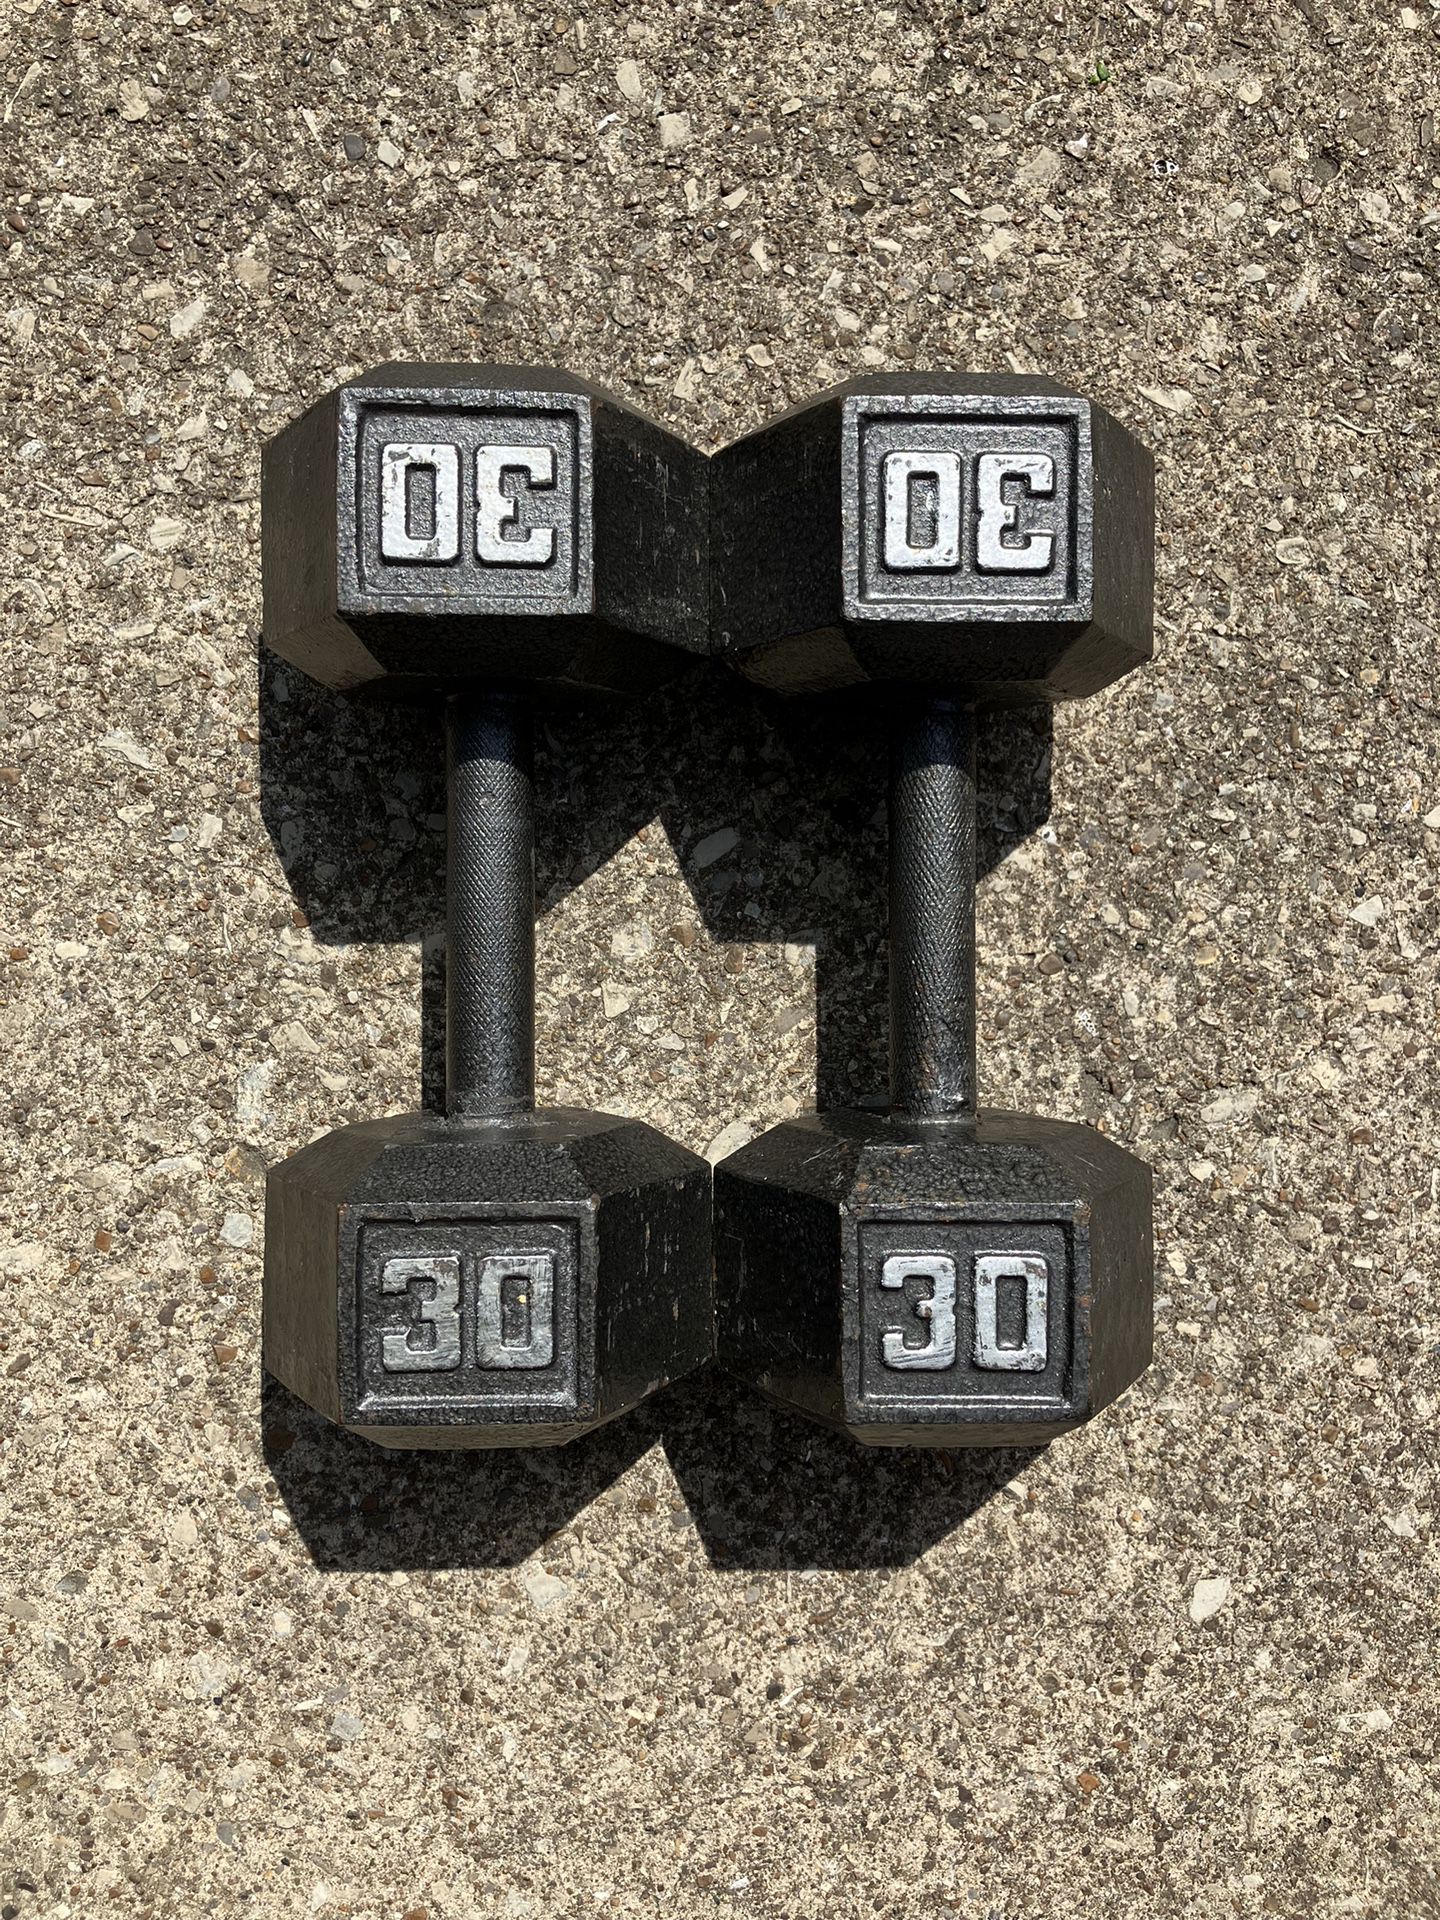 30lb Cast Iron Hex dumbbell set dumbbells 30 lb lbs 30lbs Weight Weights 60lbs total Workout Gym Exercise 